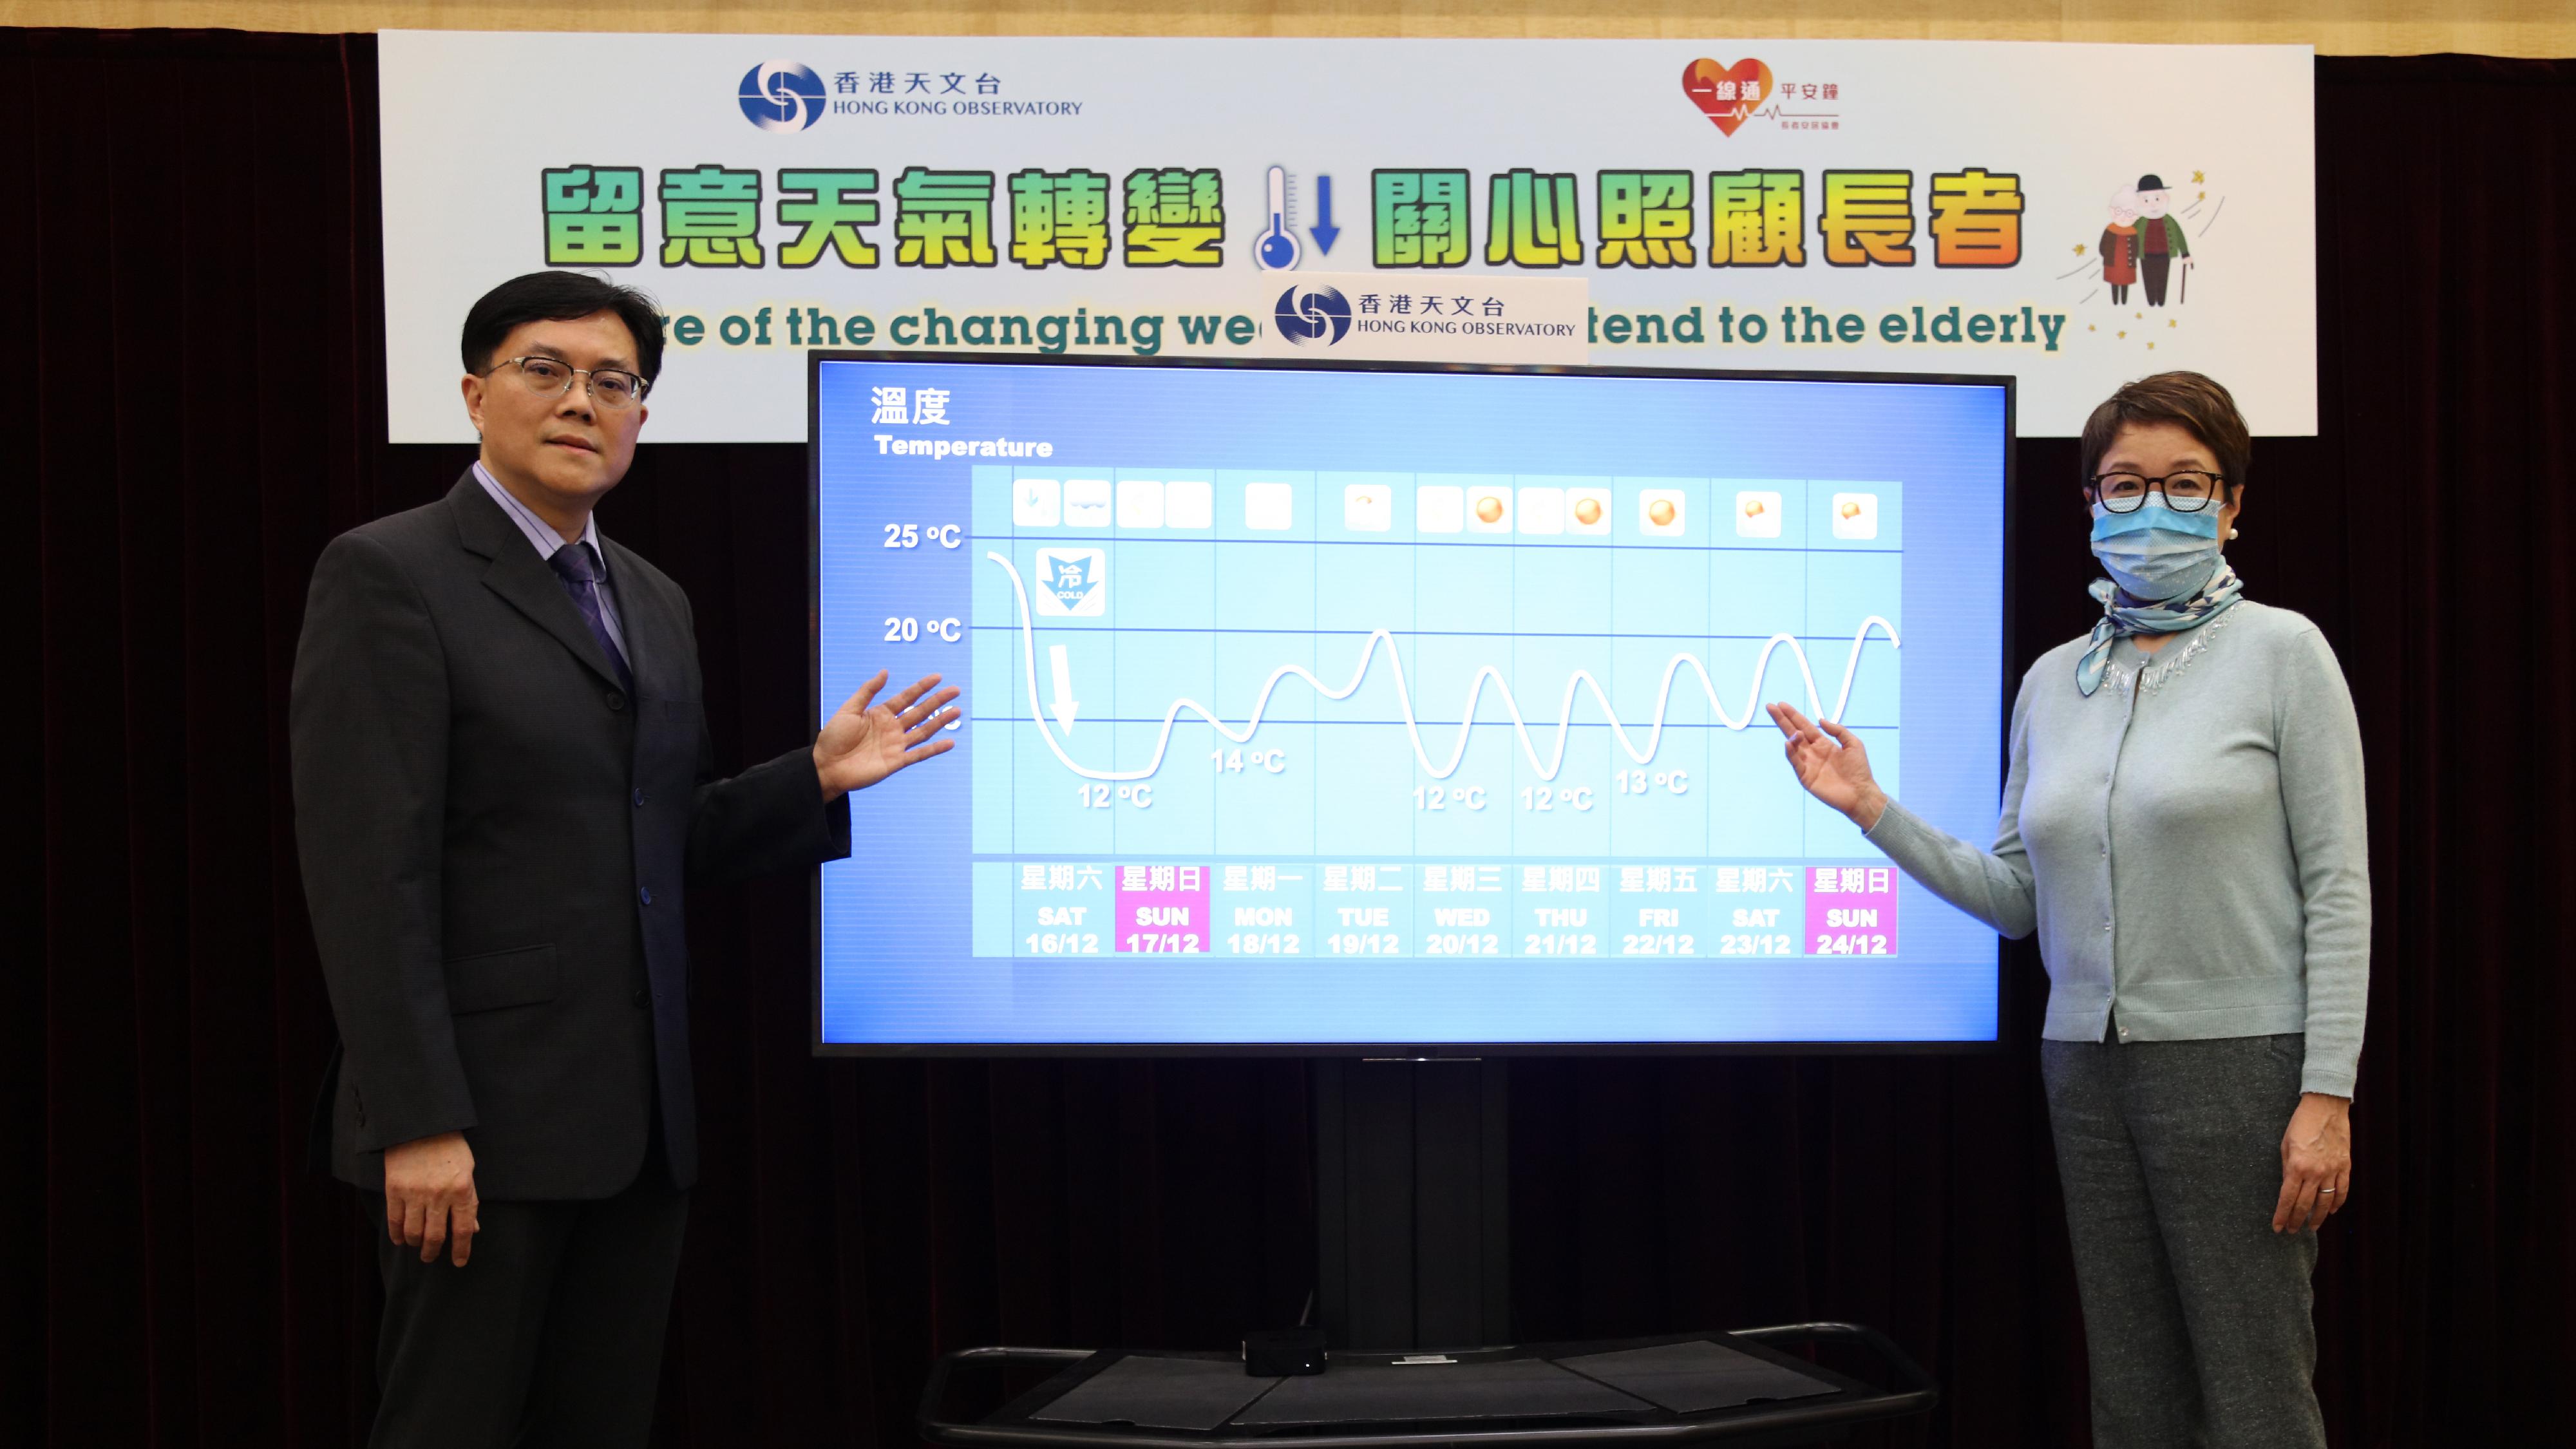 The Acting Assistant Director of the Hong Kong Observatory, Mr Cheng Yuen-chung (left), and the Chief Executive Officer of the Senior Citizen Home Safety Association, Ms Maura Wong (right), hold a joint press conference today (December 15) to remind the public to get ready for winter.